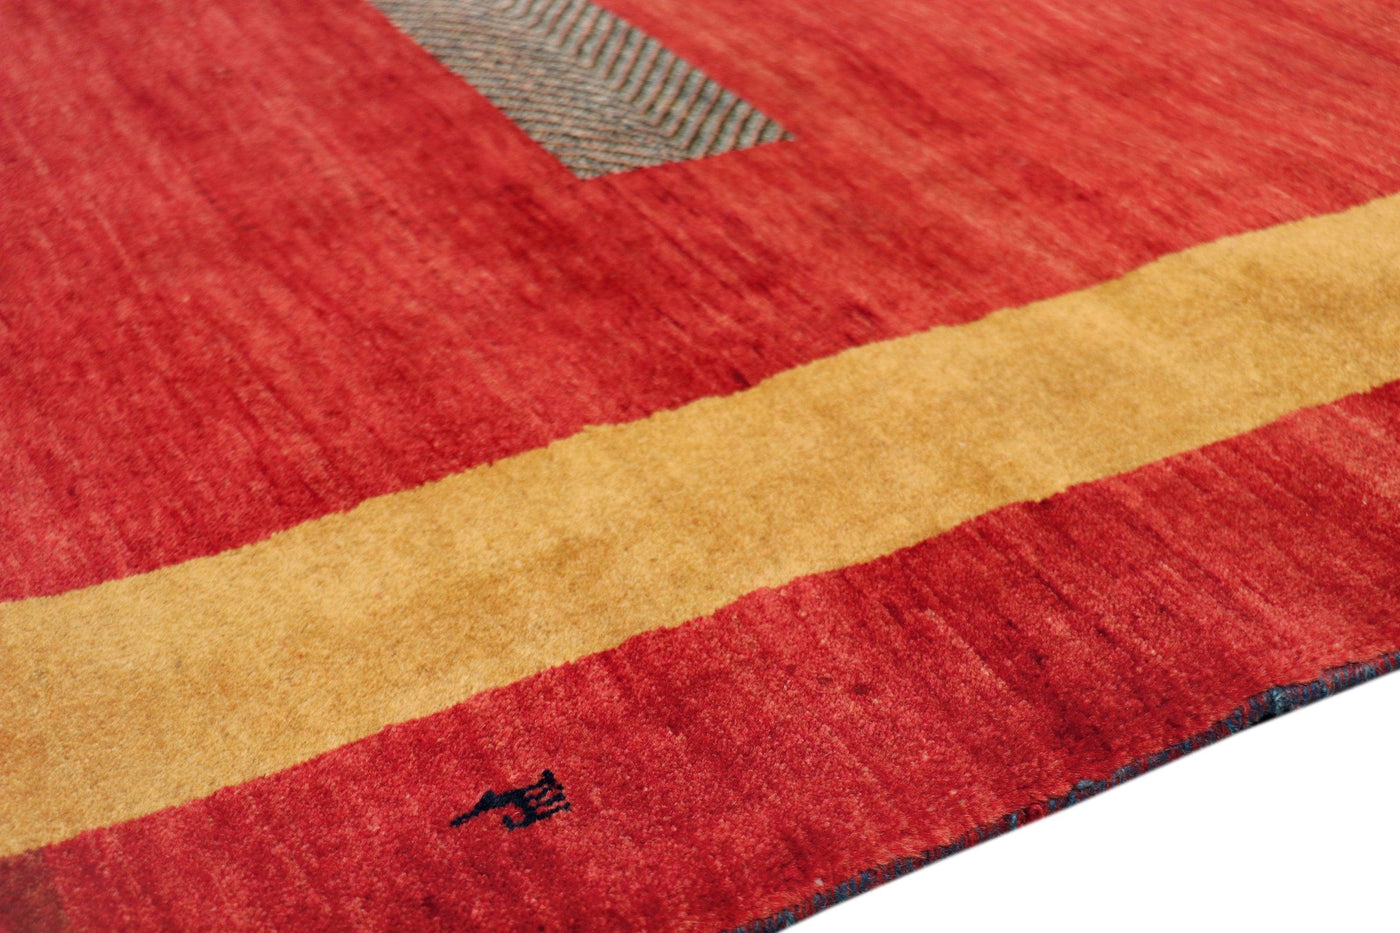 Canvello Persian Gabbeh Red And Yellow Rugs - 4' X 6'2"